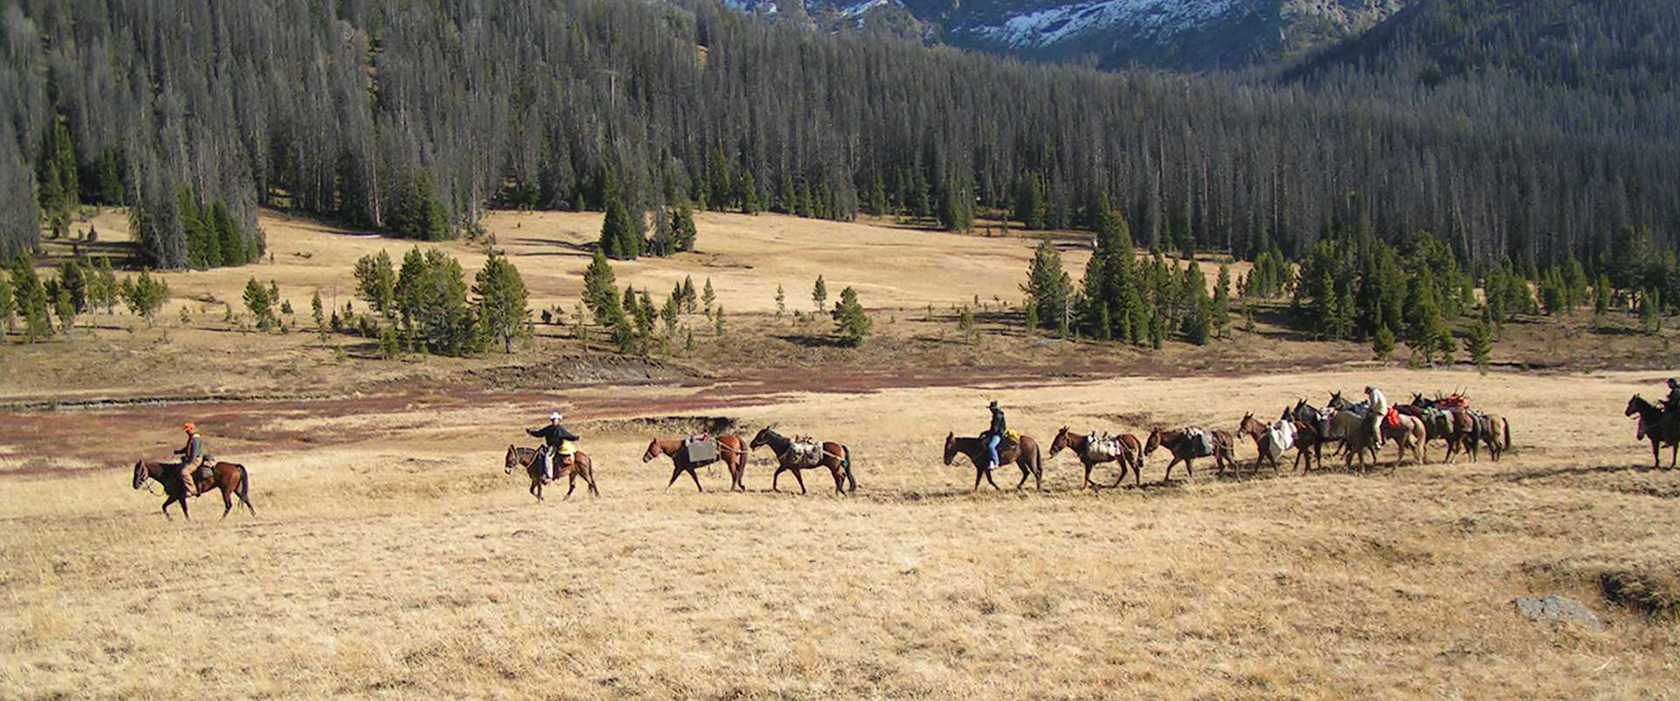 ranch real estate, wapiti WY/ranch real estate for sale in wapiti WY